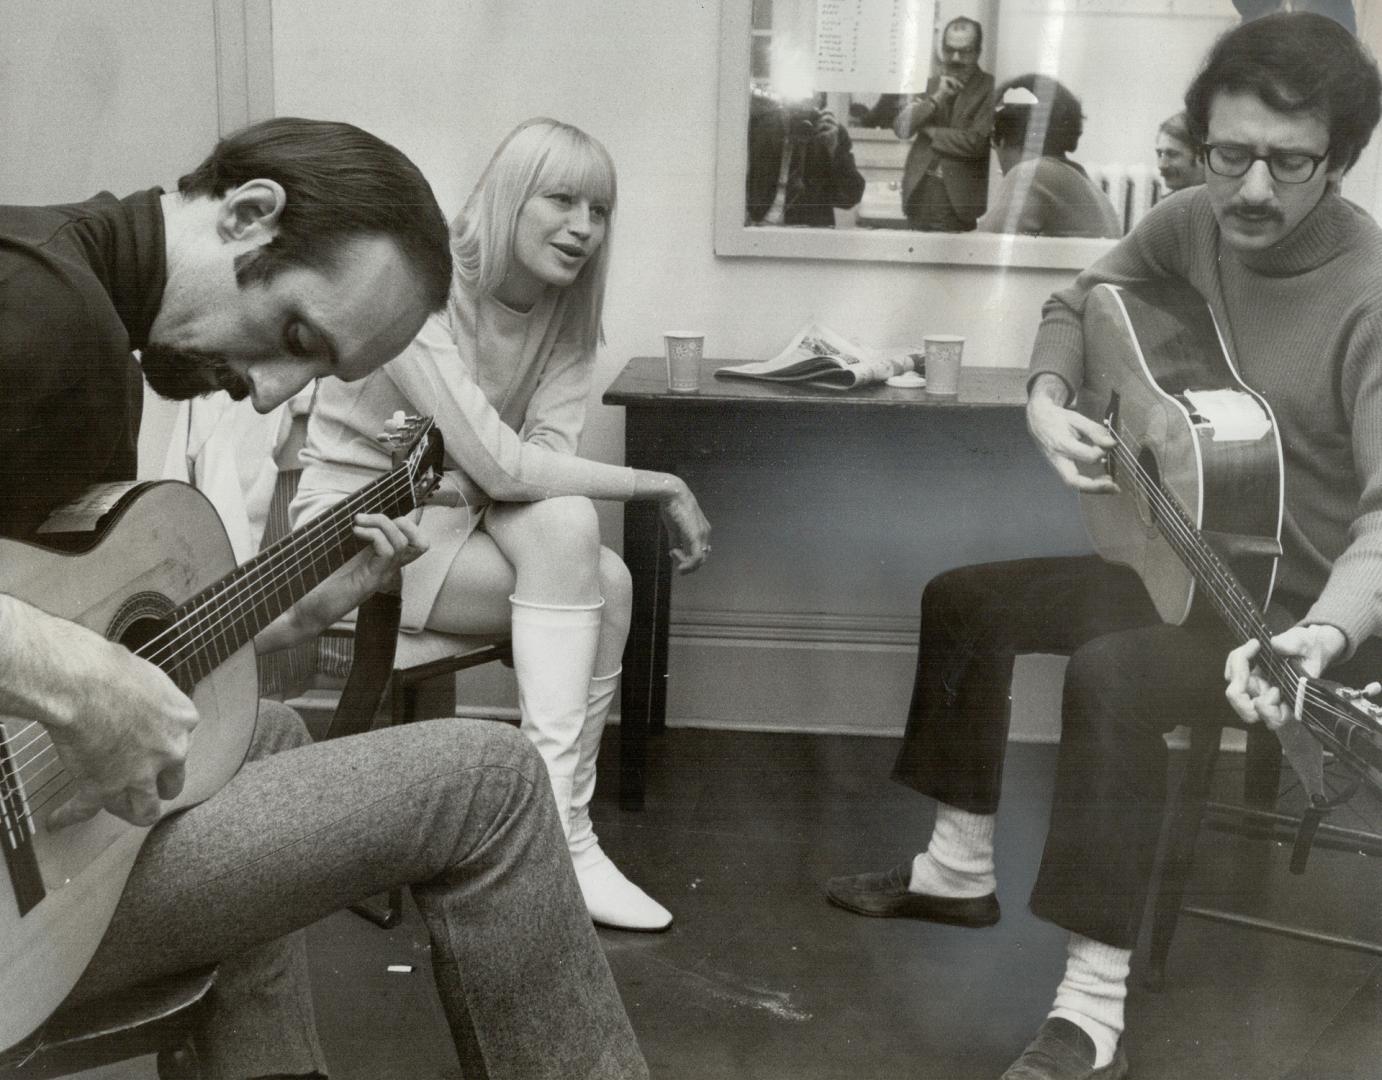 Peter Yarrow, Mary Travers and Paul Stookey warm up in dressing roo before their show at Massey Hall last night